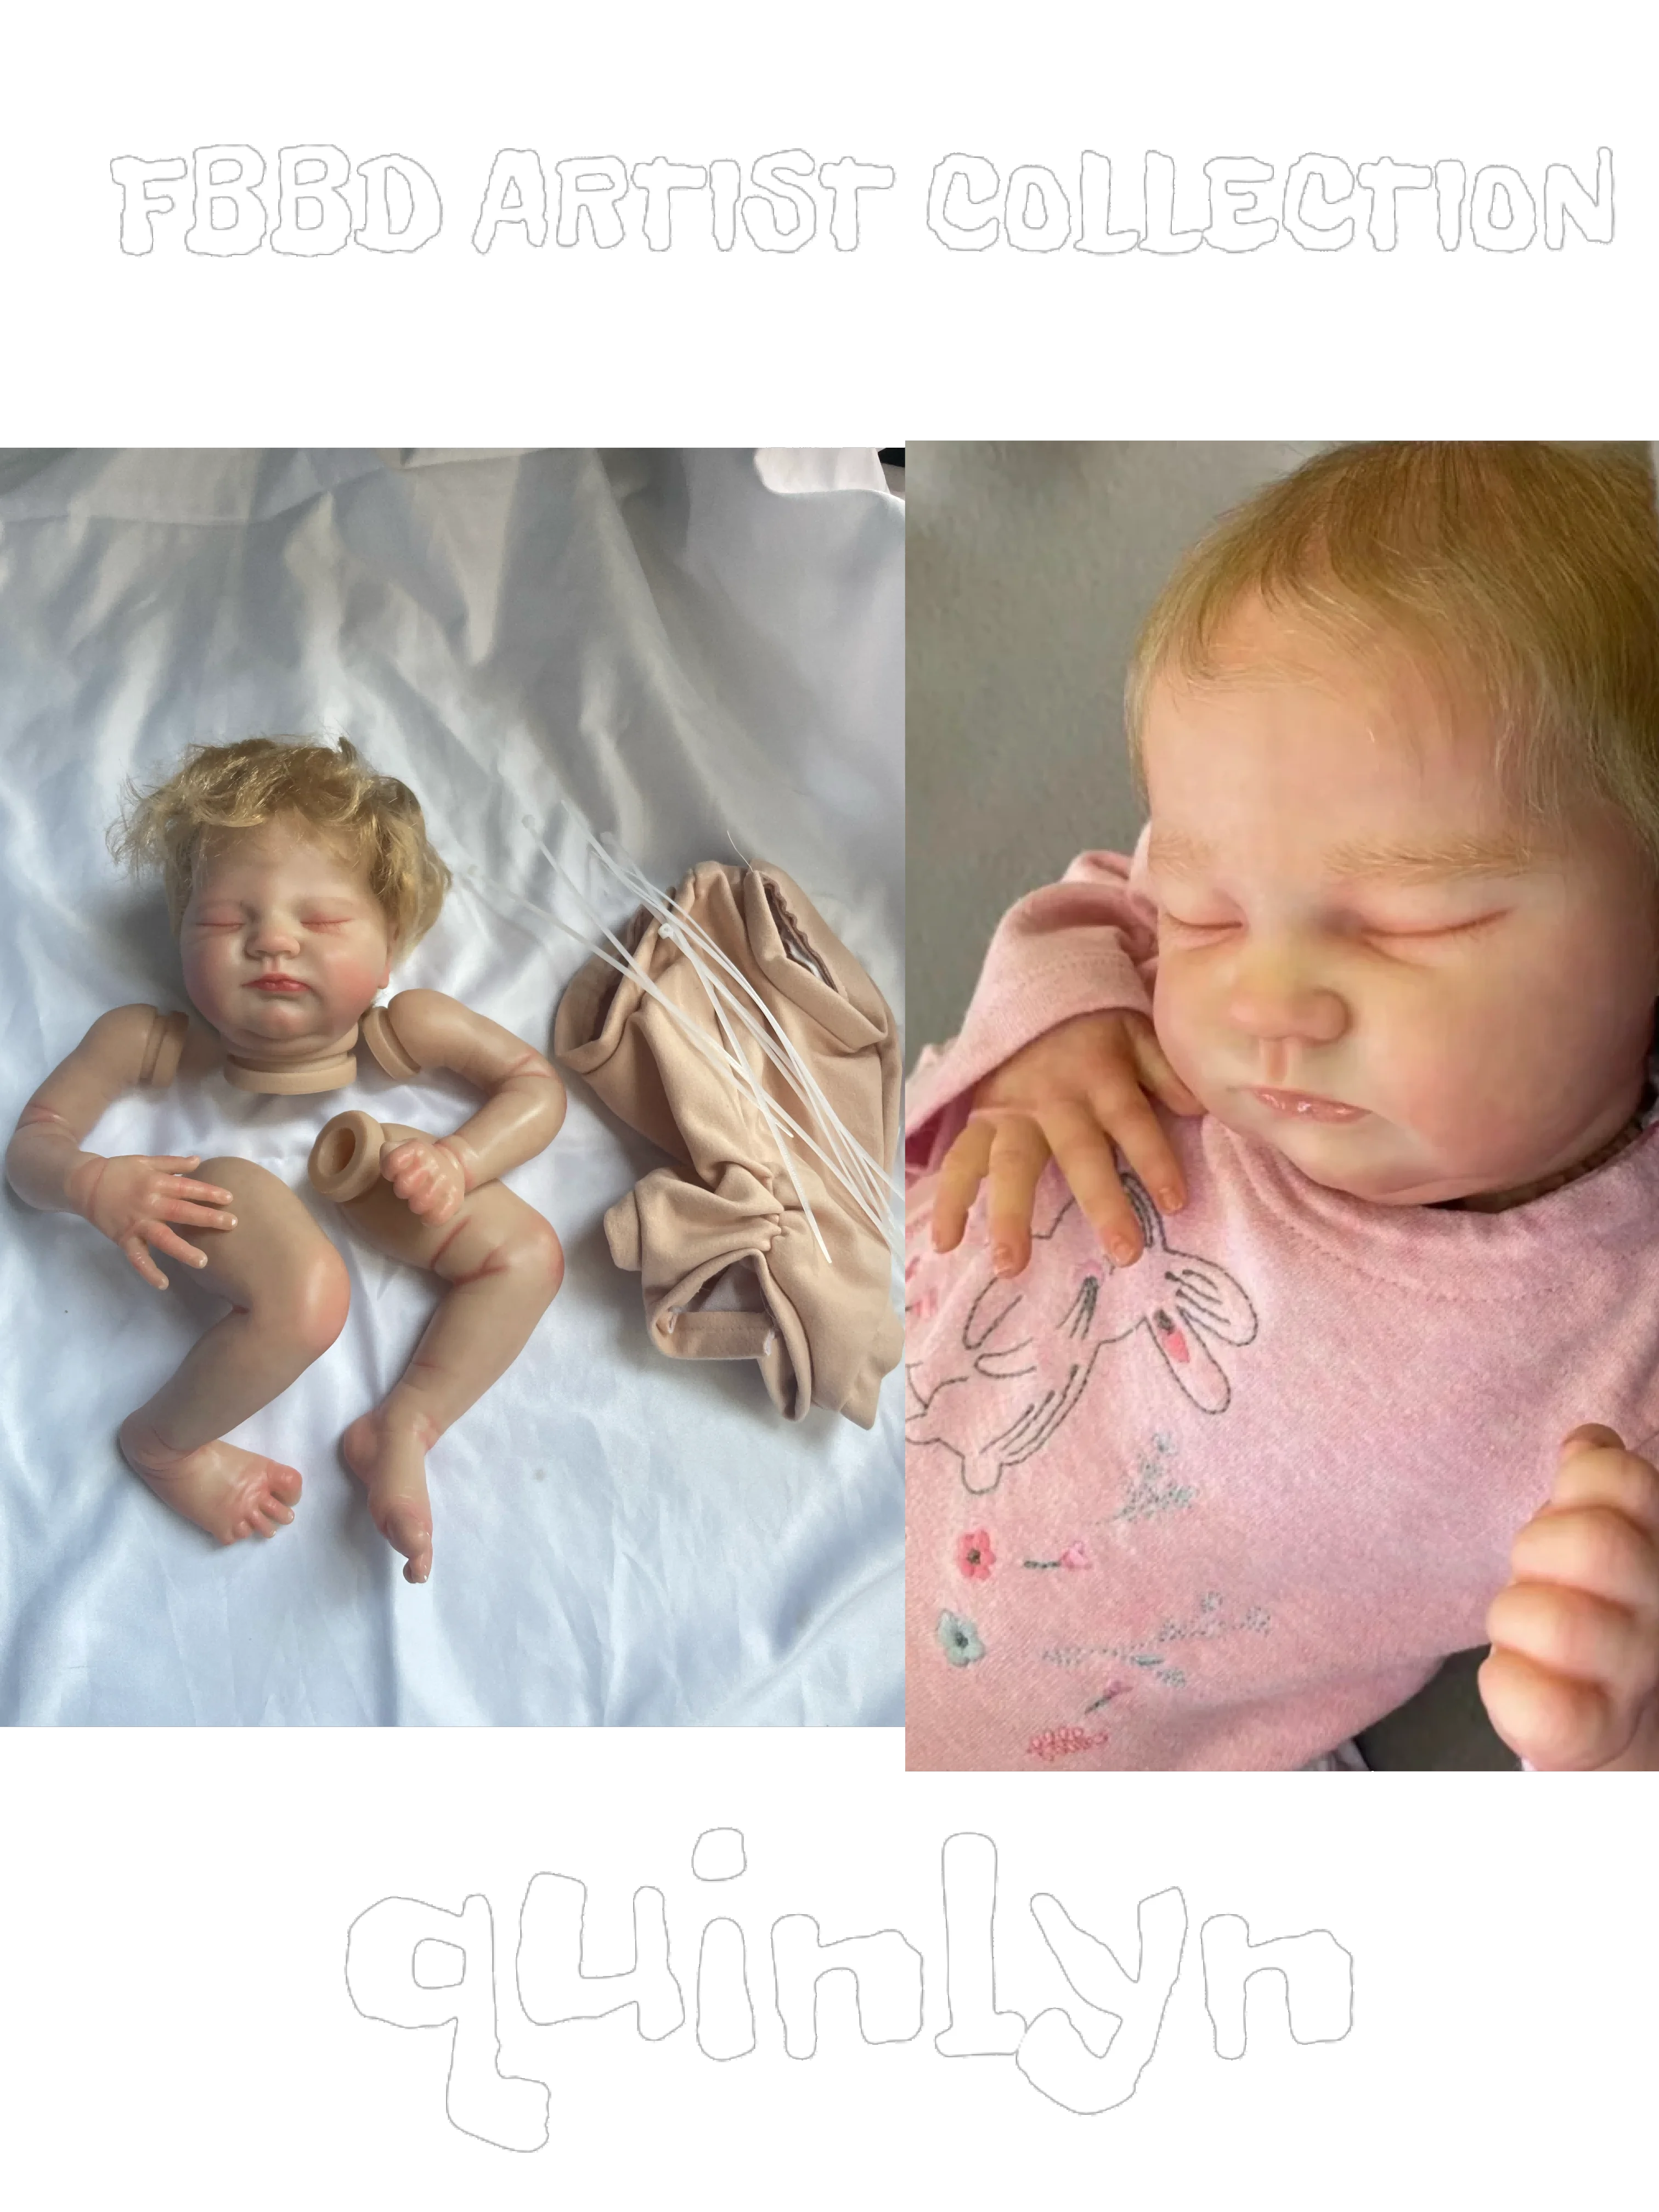 Quinlyn 20inch Bebe Reborn Painted Kit By FBBD Artist Unassembled Kit With Veins Lifelike With Hand-Rooted Hair Dolls For Girl 50cm bebe reborn doll laura made by fbbd real photos with hand rooted new hair high quality artist made dolls for children